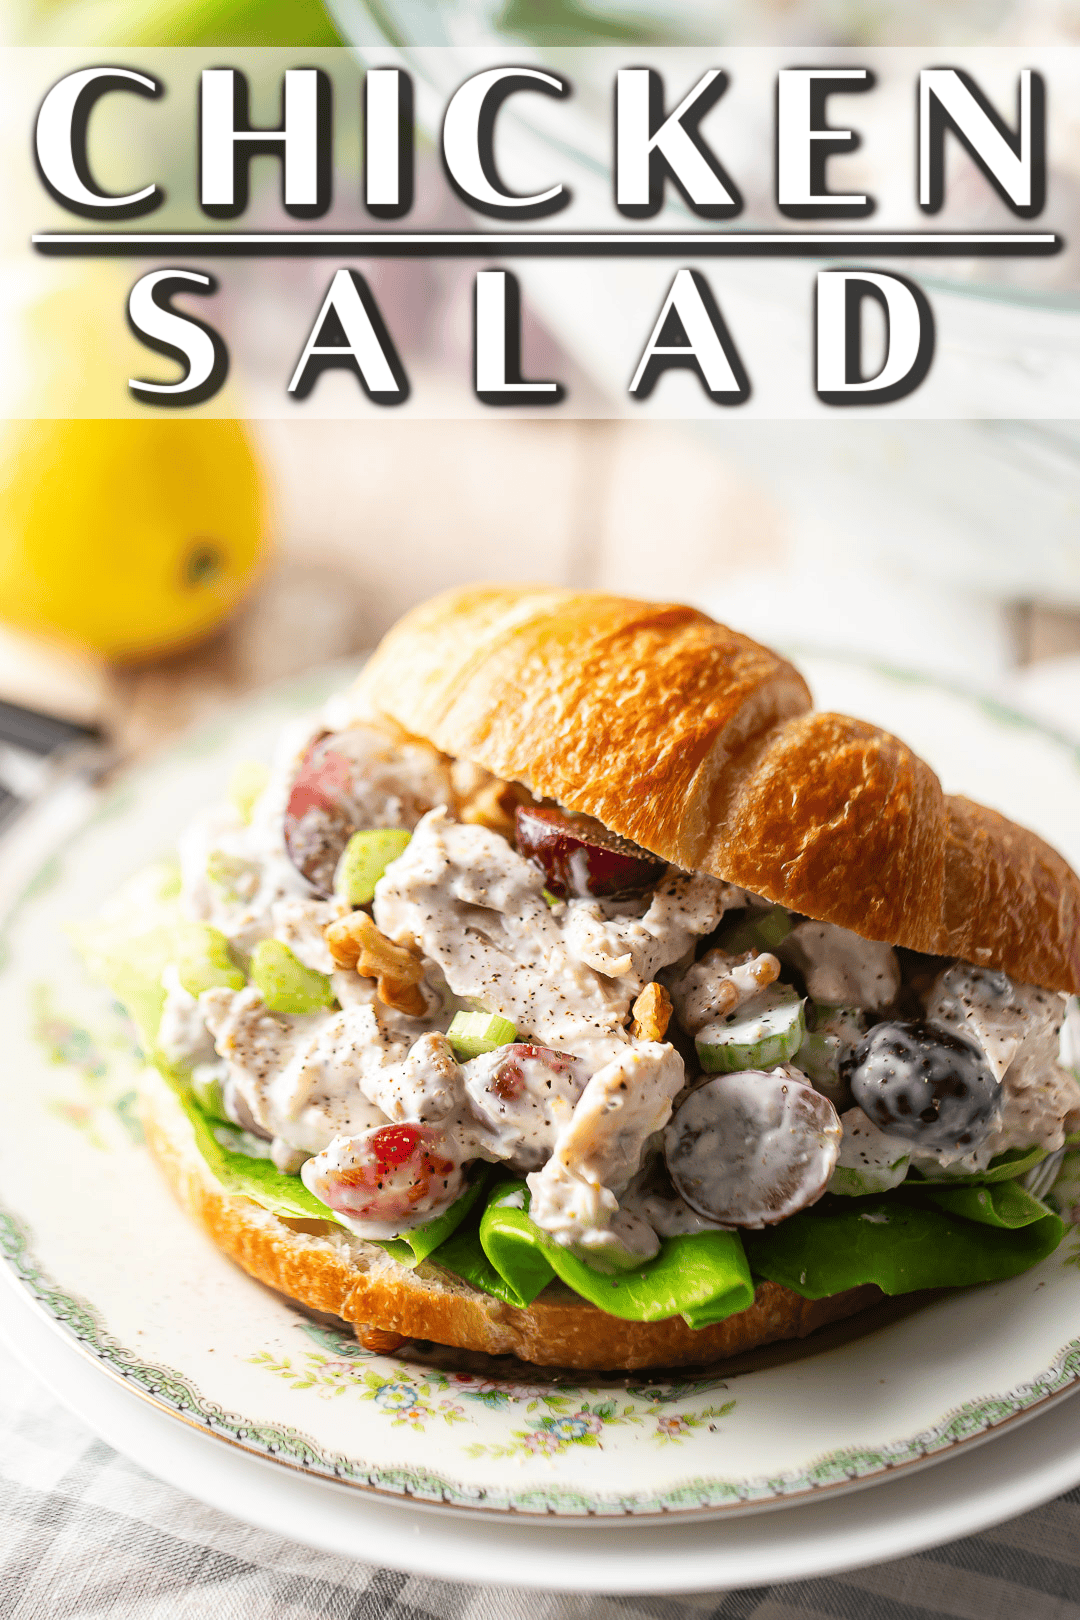 Chicken salad with celery, grapes, and nuts, served on a croissant with a pale background.